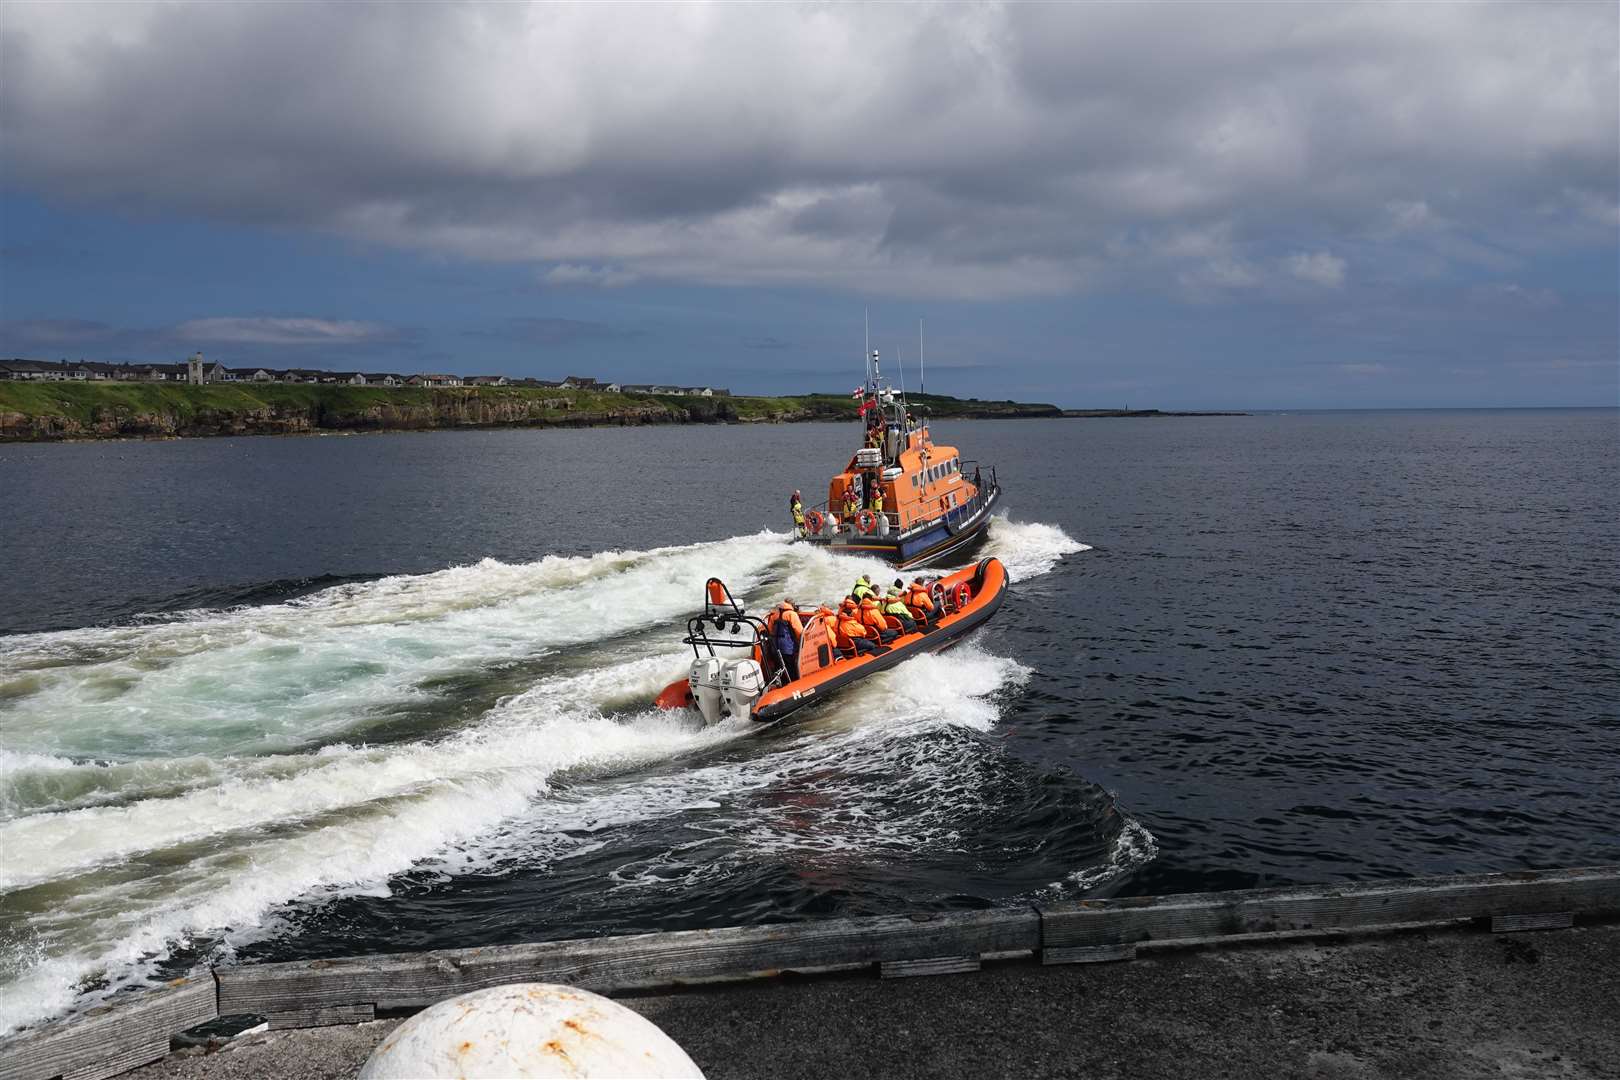 Derek Bremner sent this image of the Wick lifeboat Roy Barker II and Caithness Seacoast's Geo Explorer leaving Wick harbour.